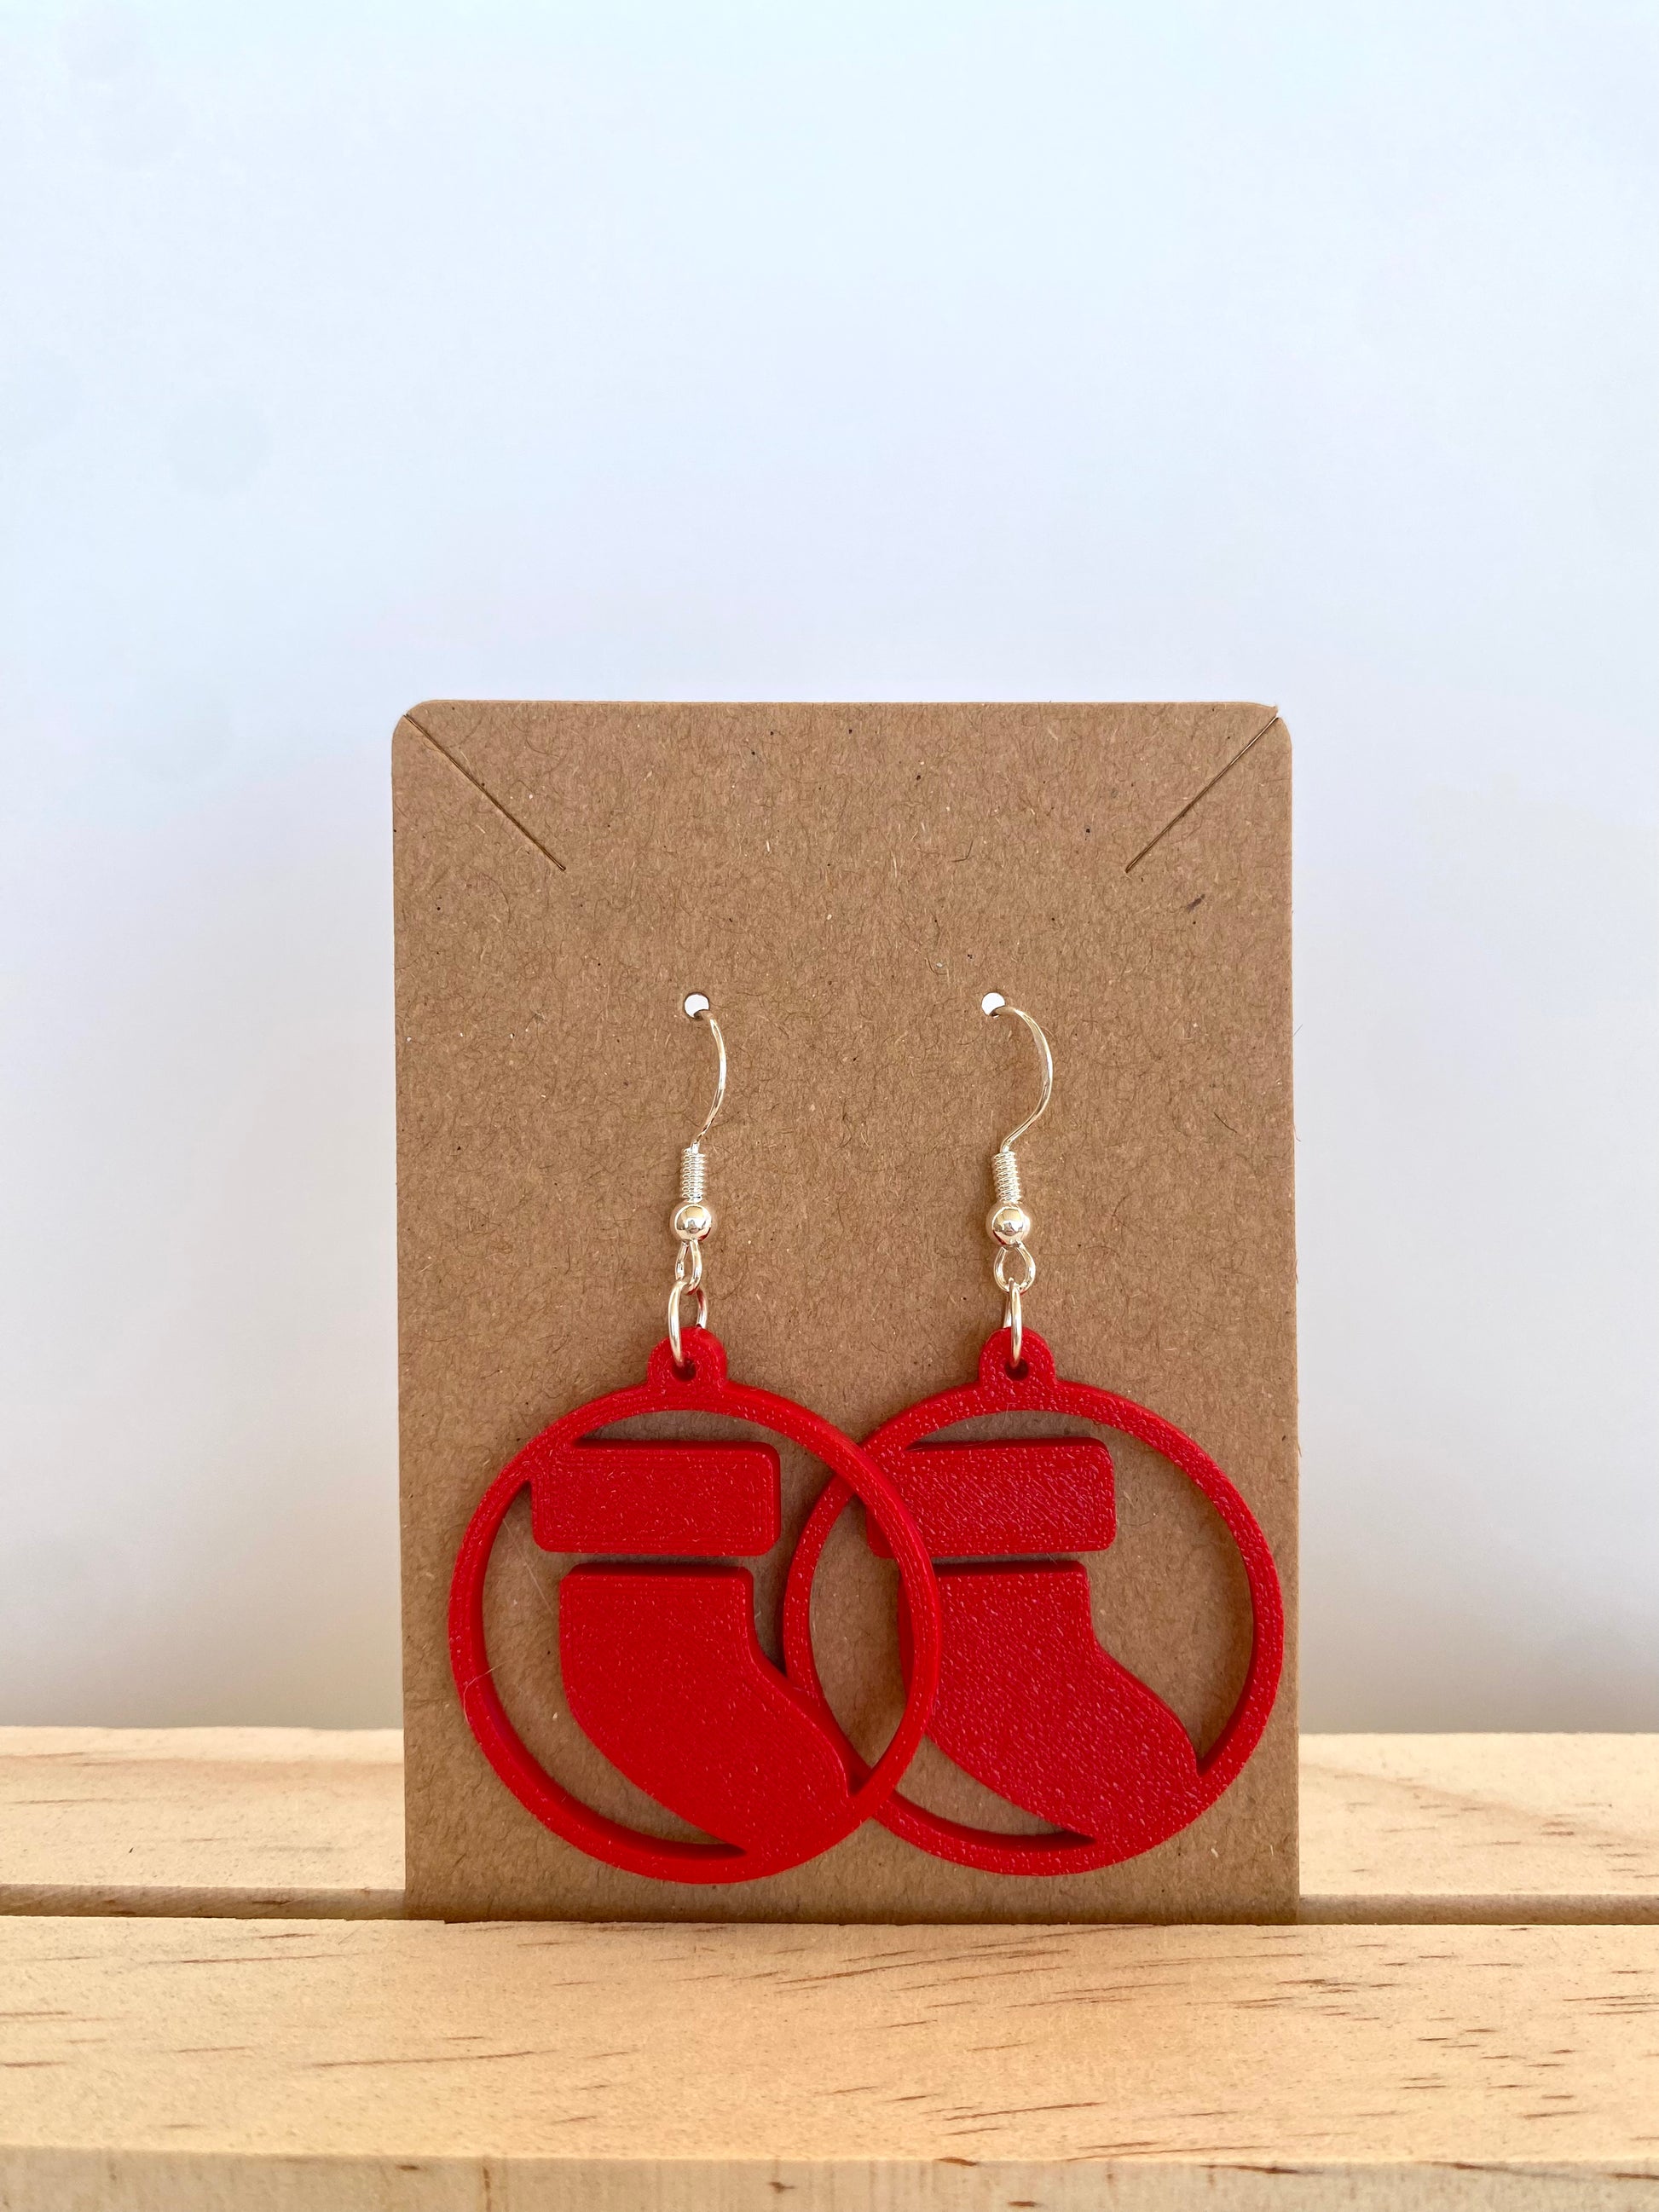 Circle Stocking Earrings in red.